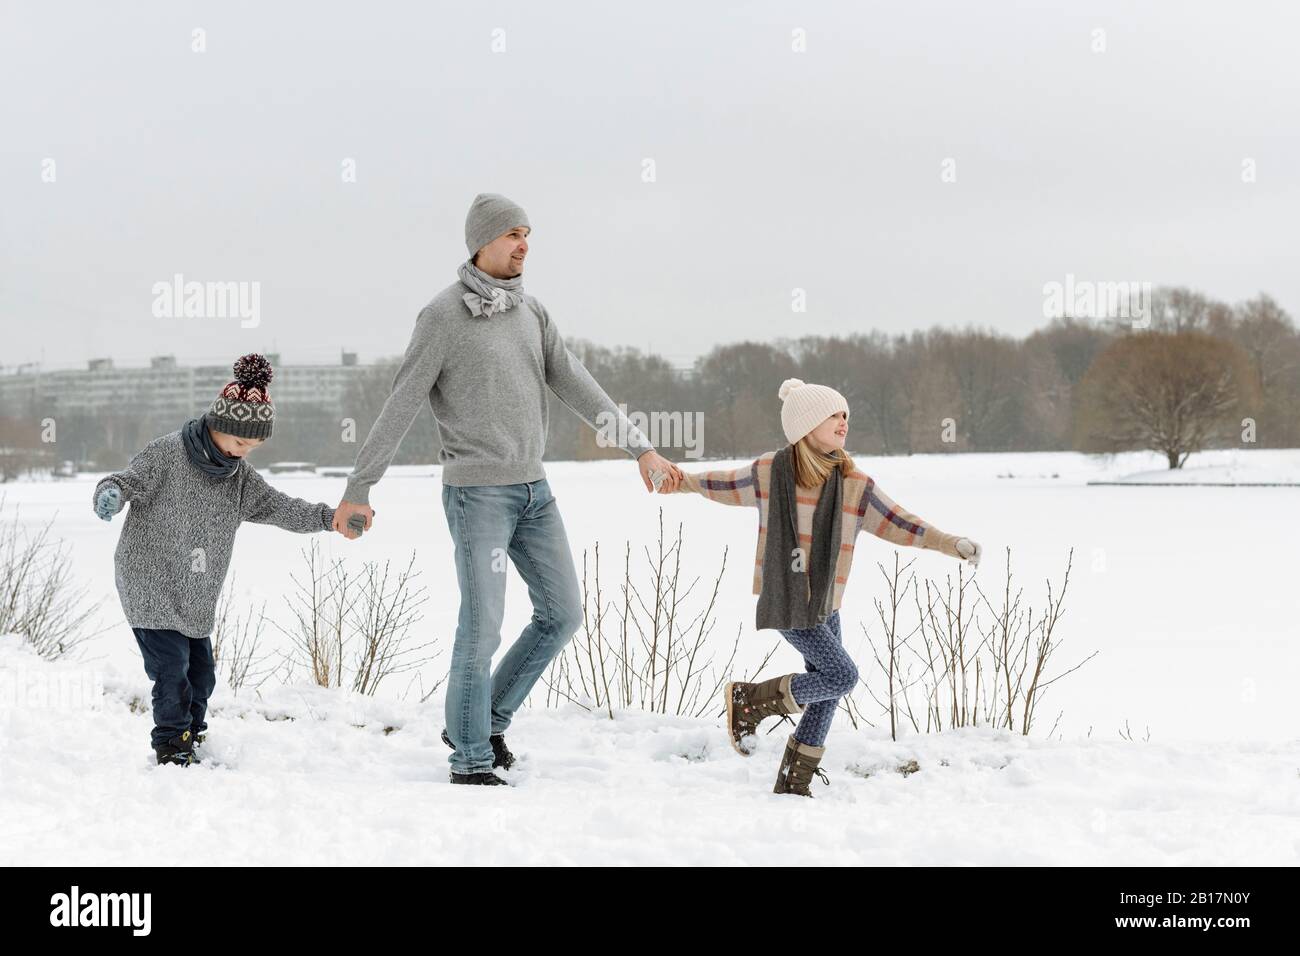 Father and two children walking in winter landscape Stock Photo